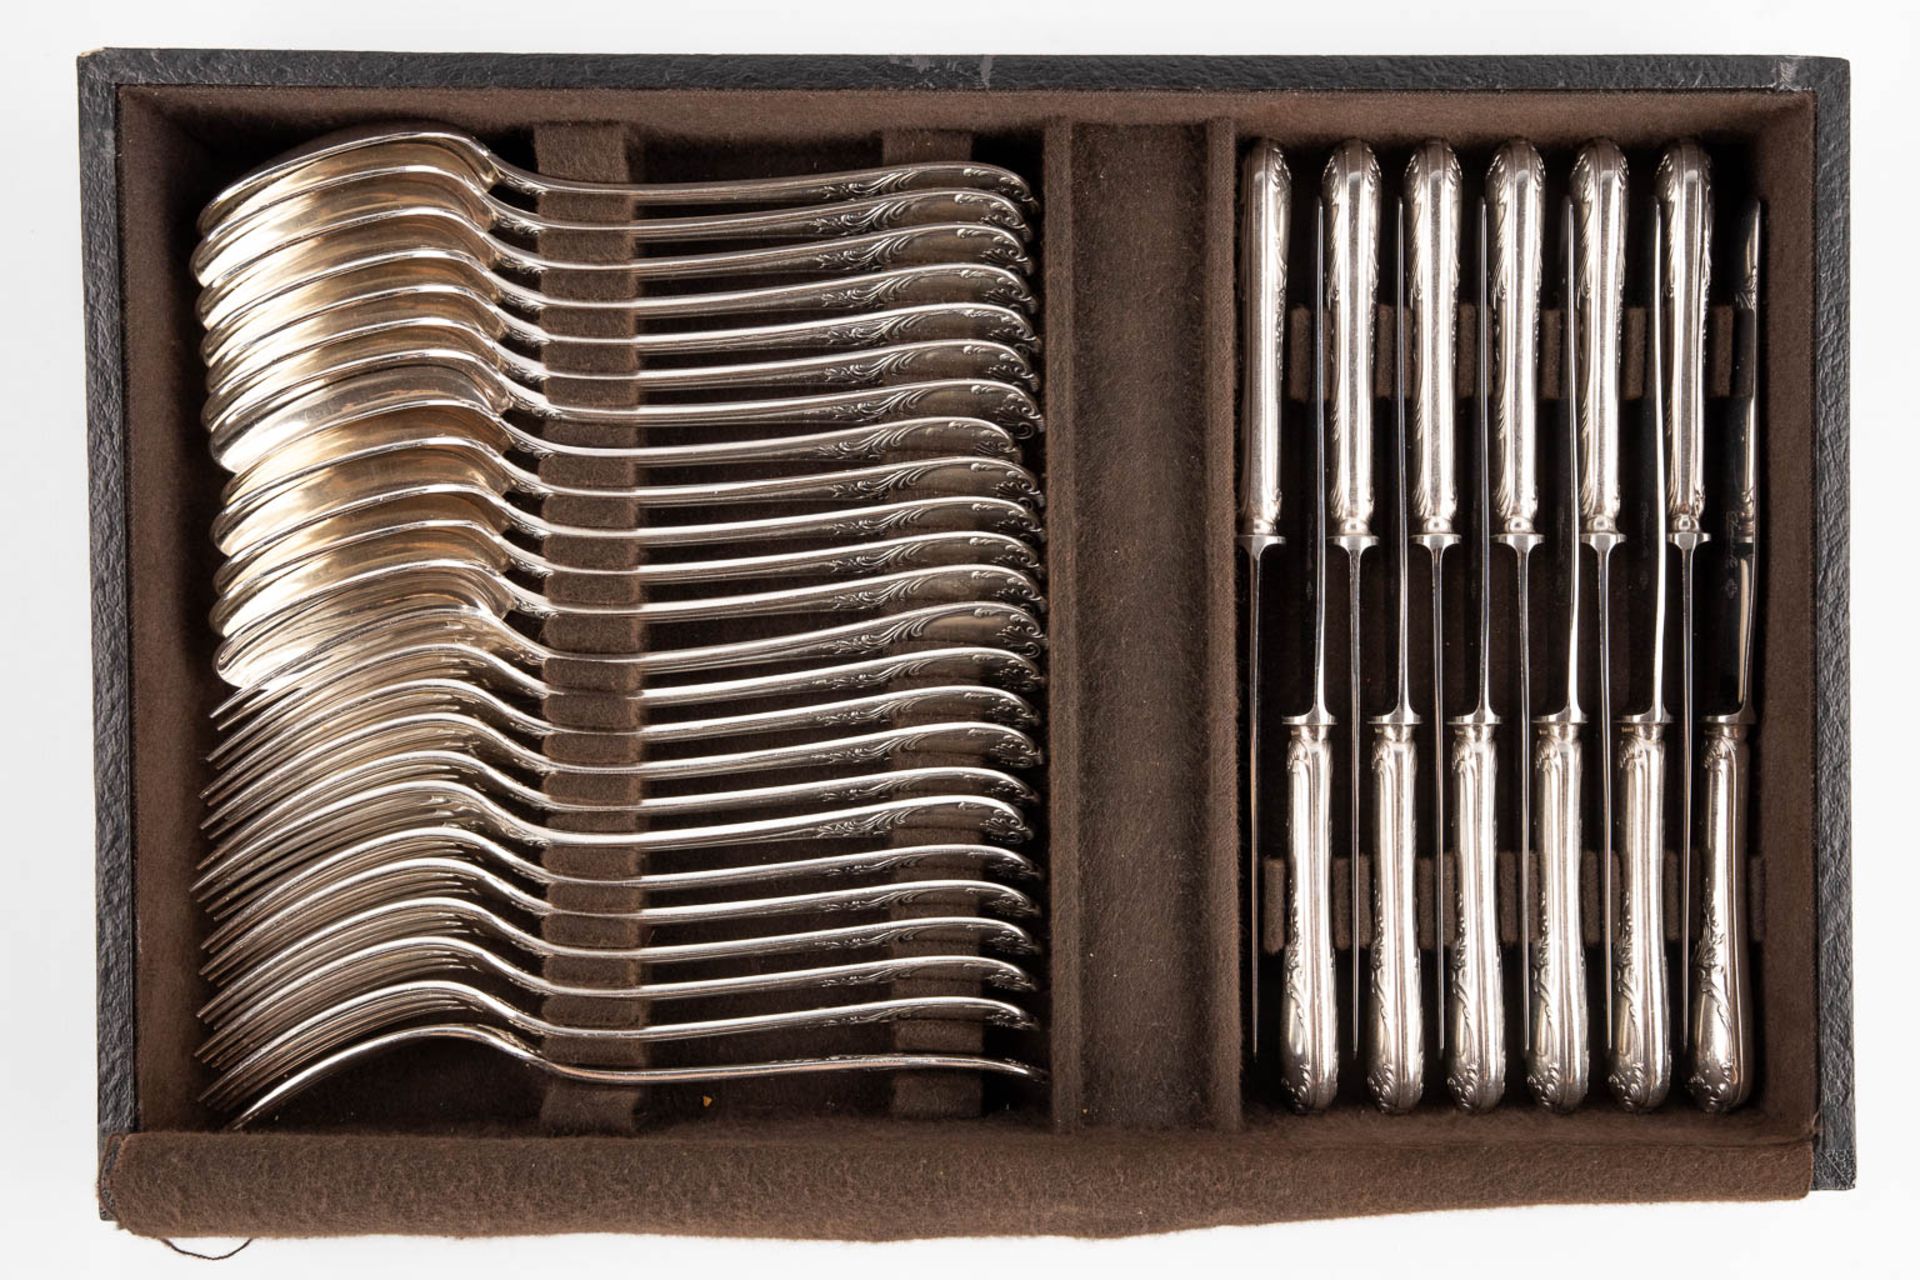 Christofle 'Marly' a 135-piece silver-plated cutlery in the original storage chest. (D:30 x W:47 x H - Image 18 of 18